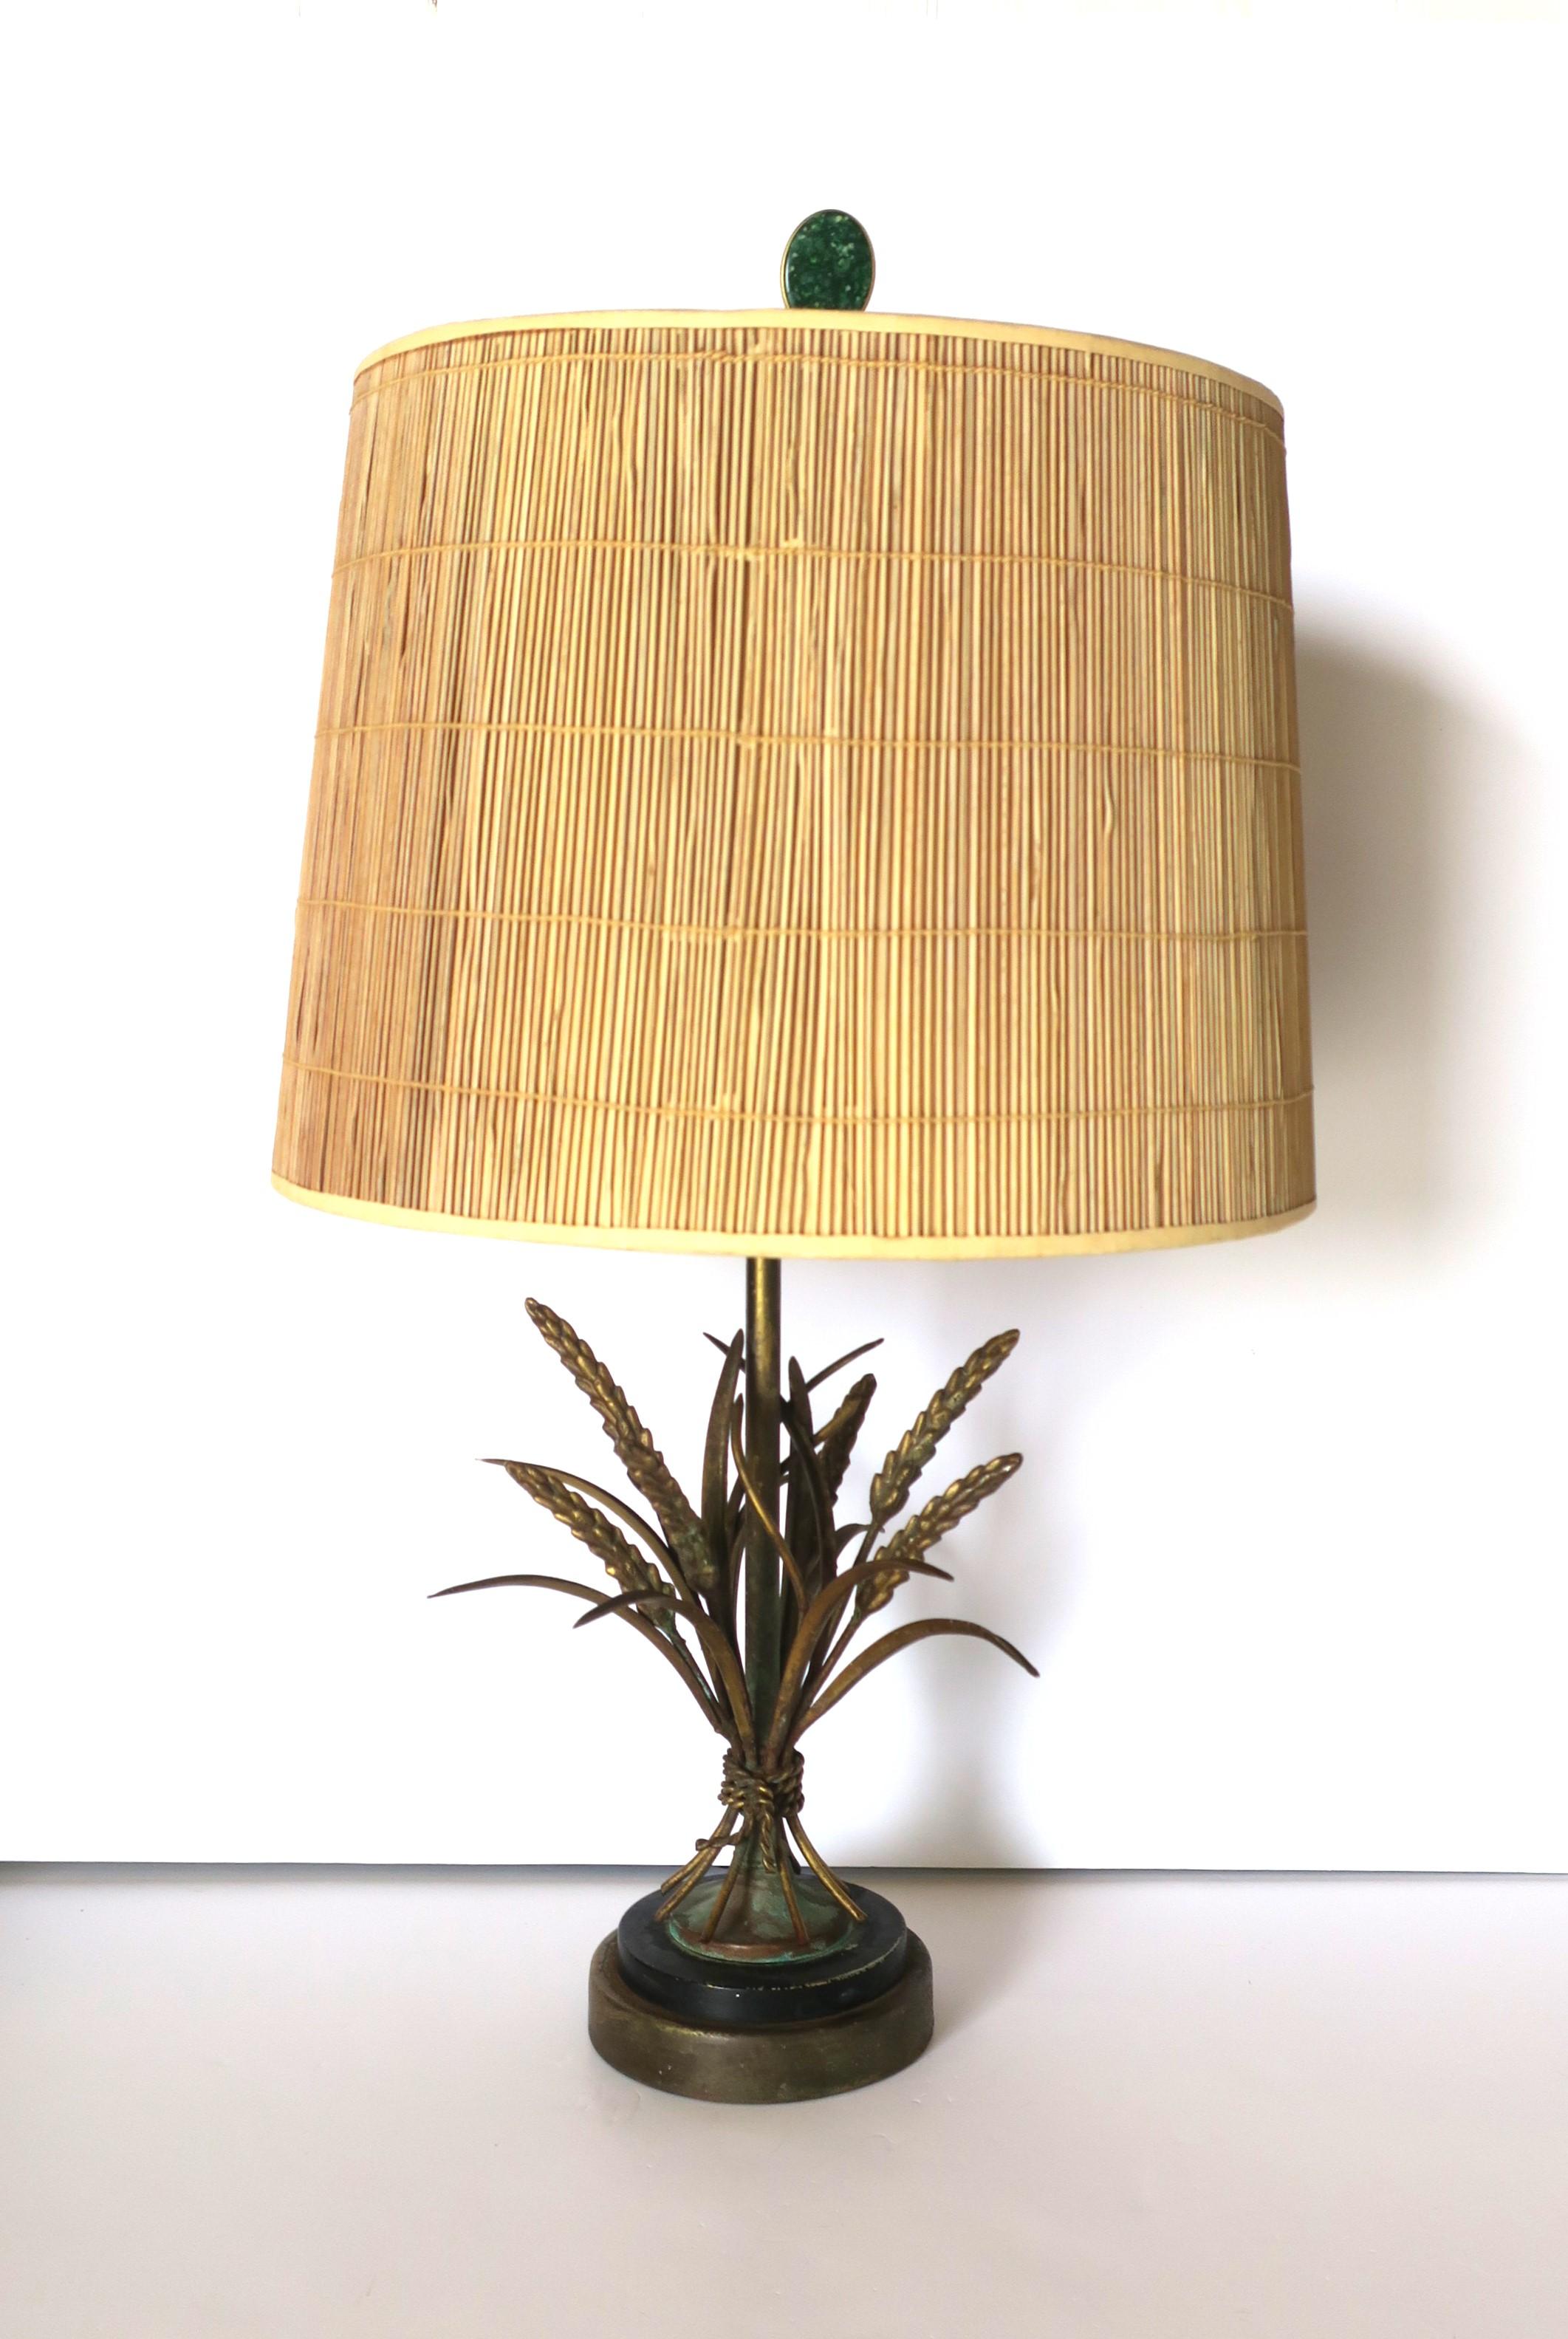 An Italian gold gilt brass Sheaf-of-Wheat desk or table lamp, in the style of design house Maison Baguès, circa early to mid-20th century, Italy. Lamp is a medium-size desk or table lamp with green stone and brass finial. 

Dimensions: 
25.5